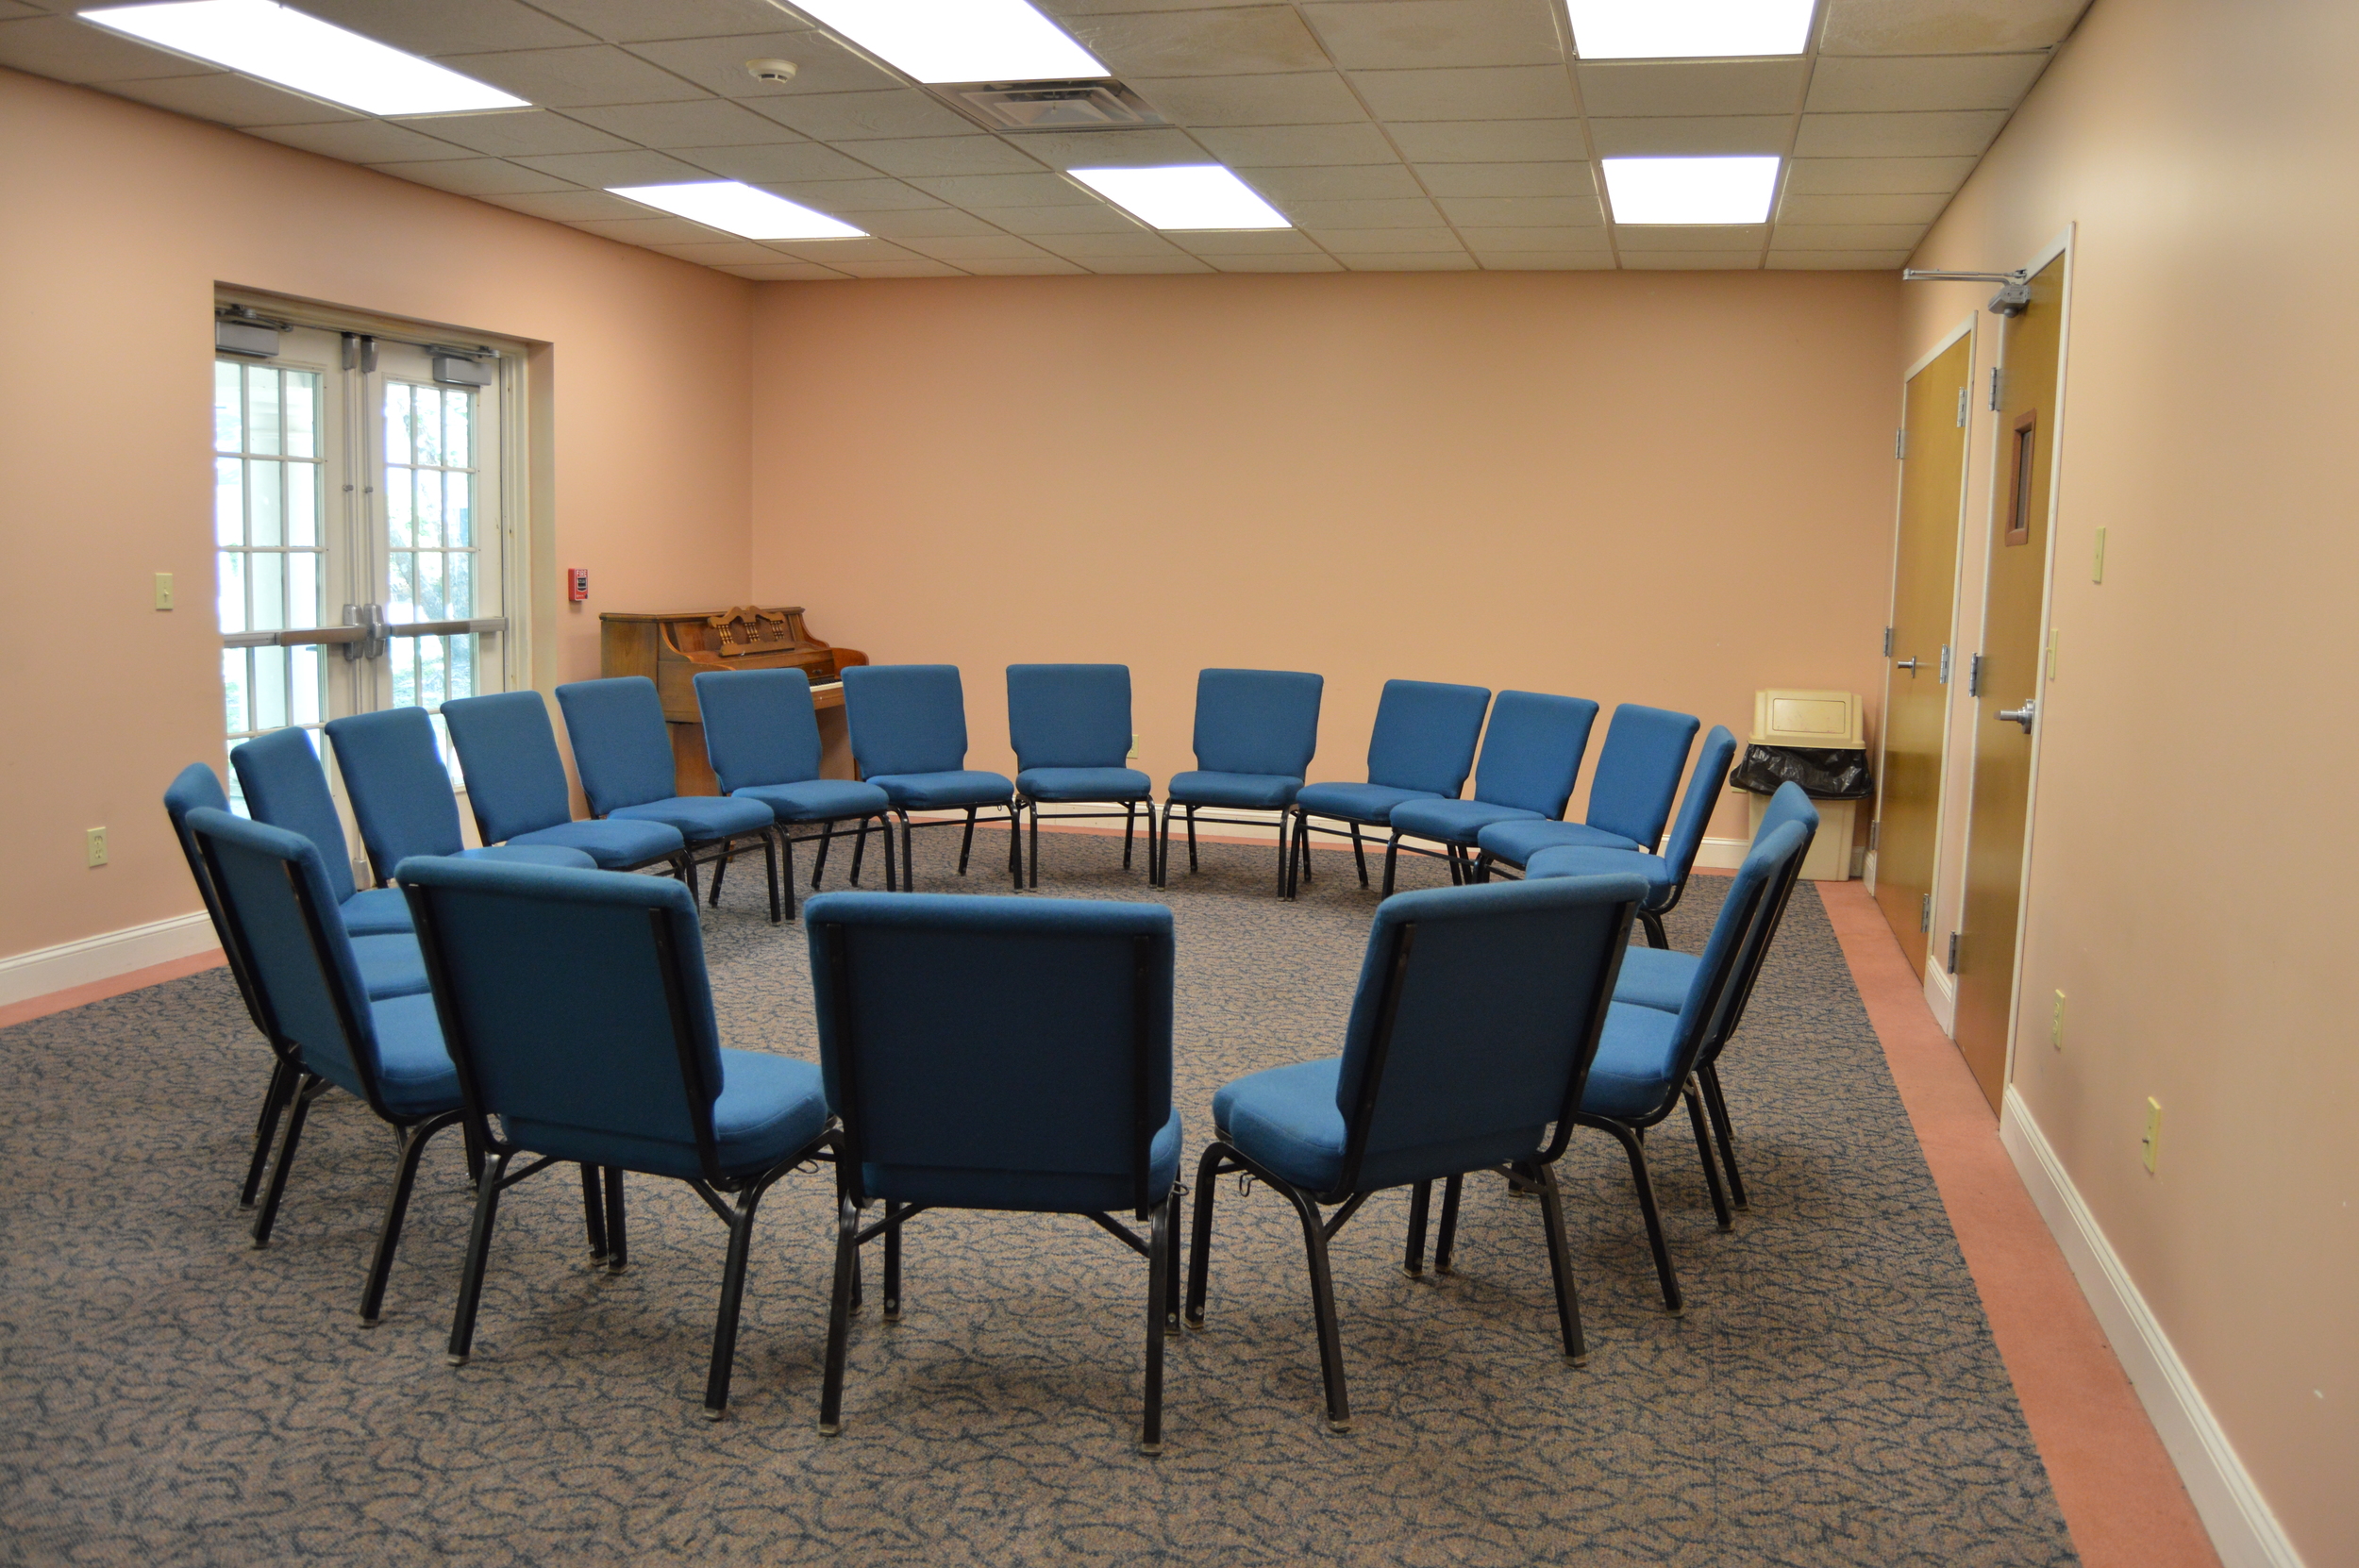 STC Classroom, Prepared for Small Group Discussions